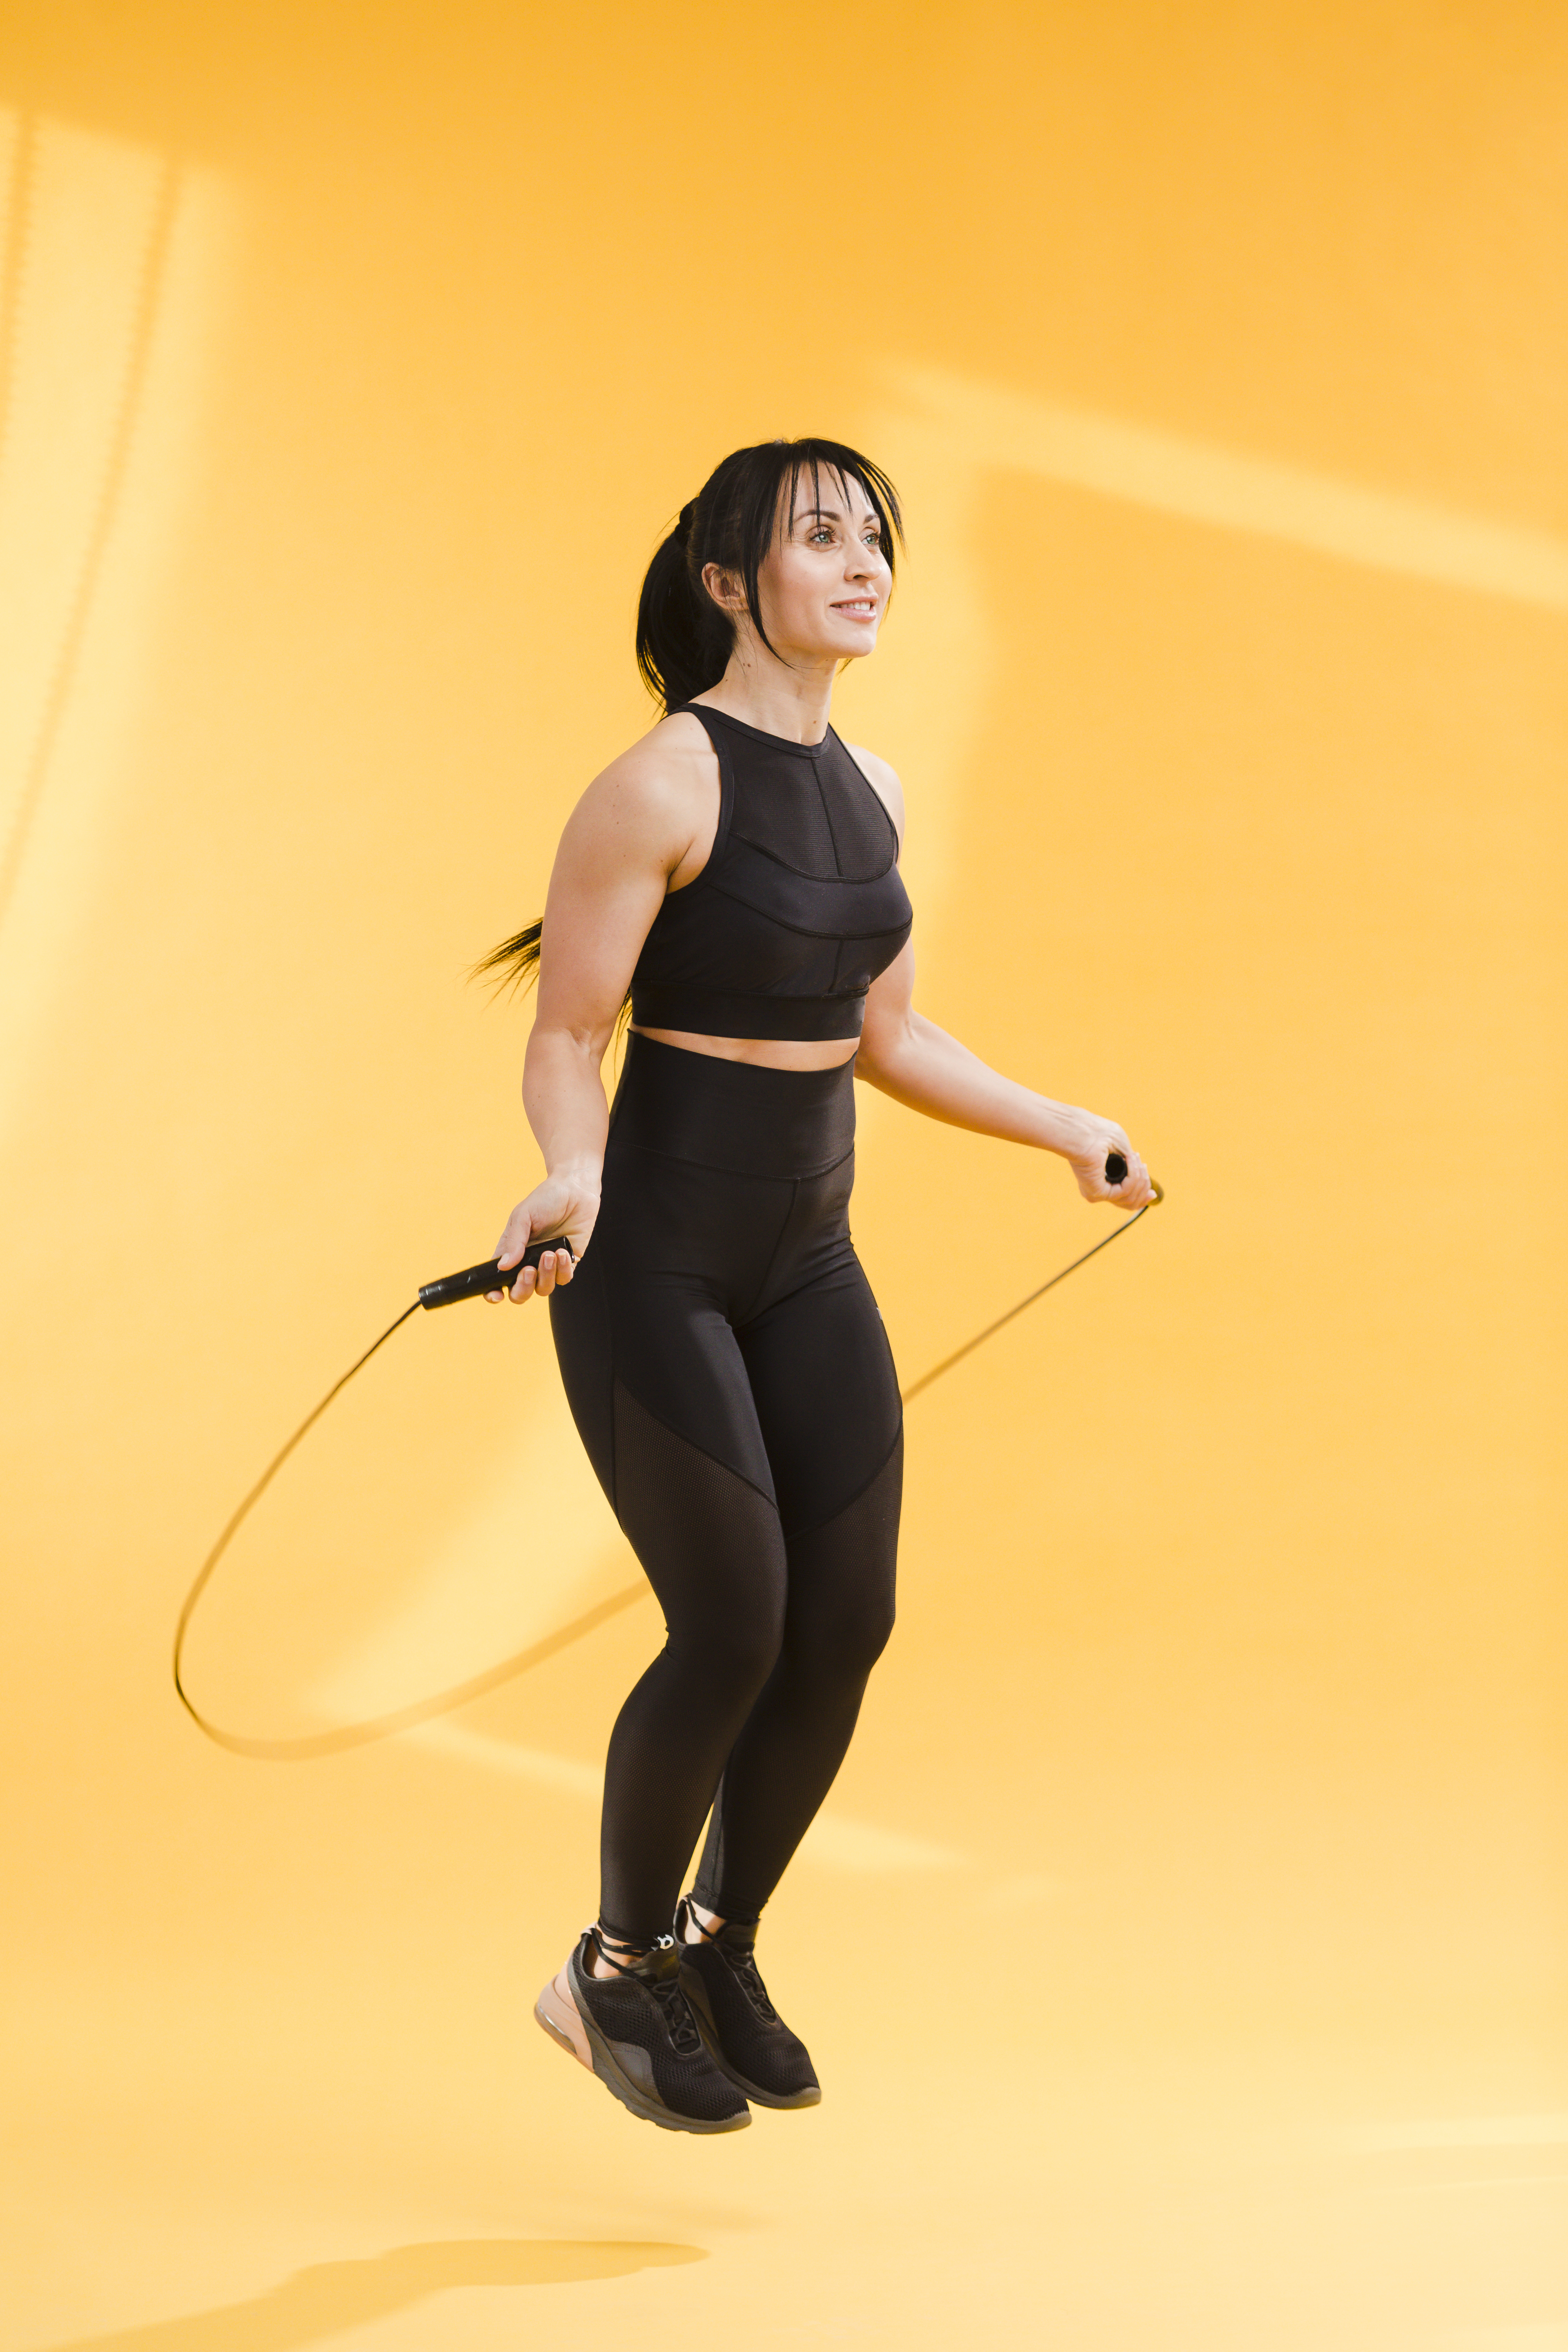 side-view-athletic-woman-gym-outfit-jumping-rope